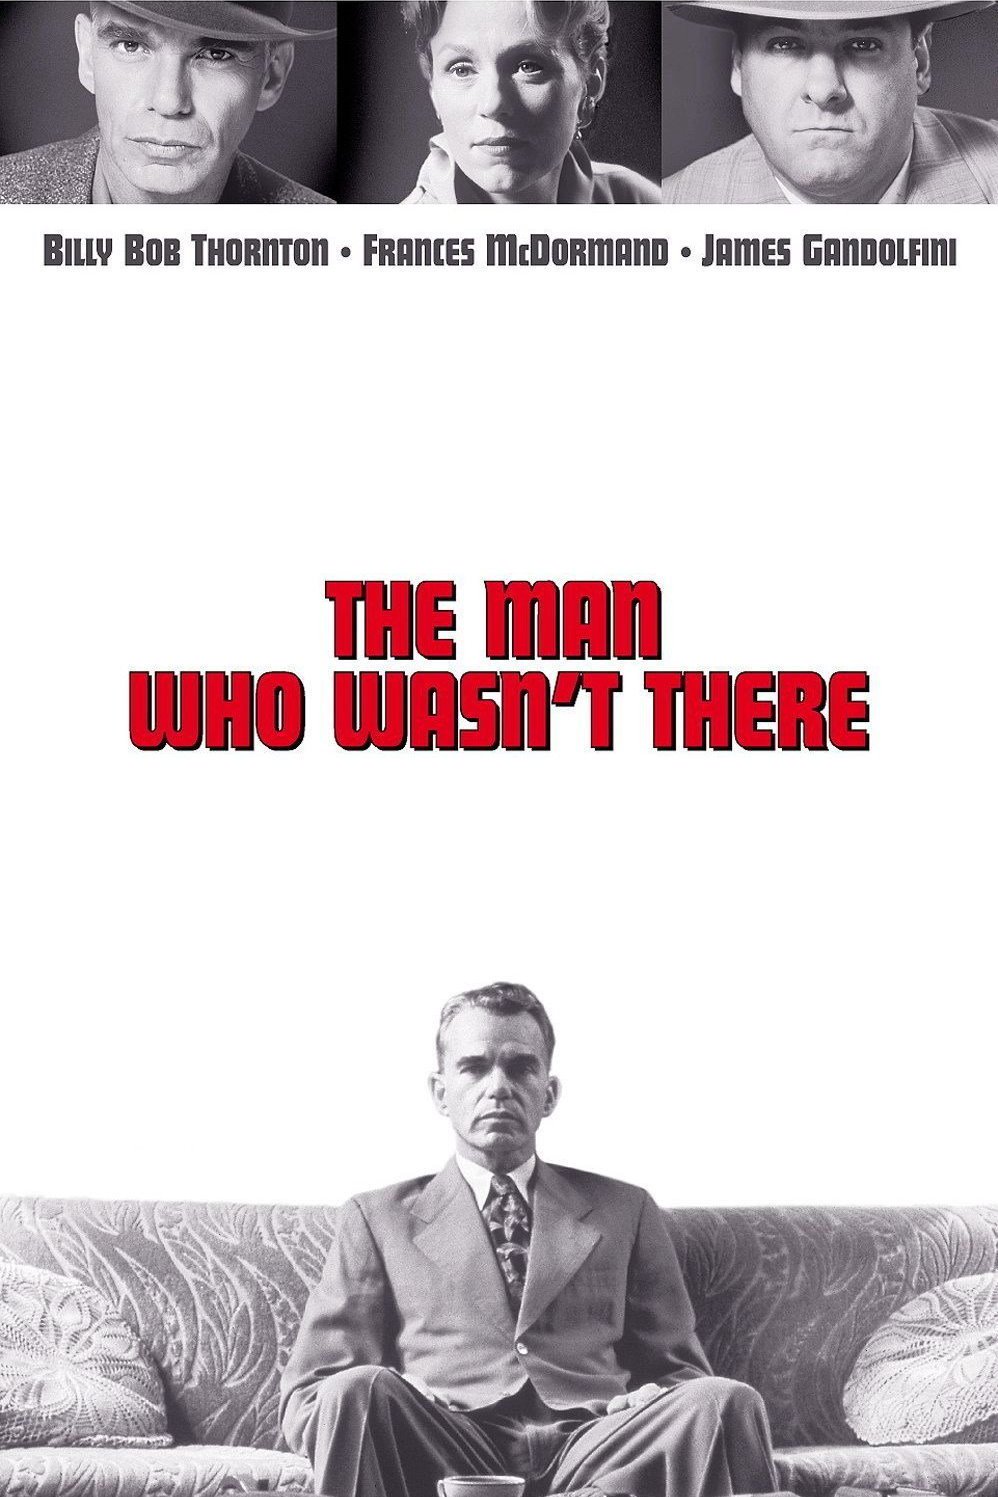 Plakat von "The Man Who Wasn't There"